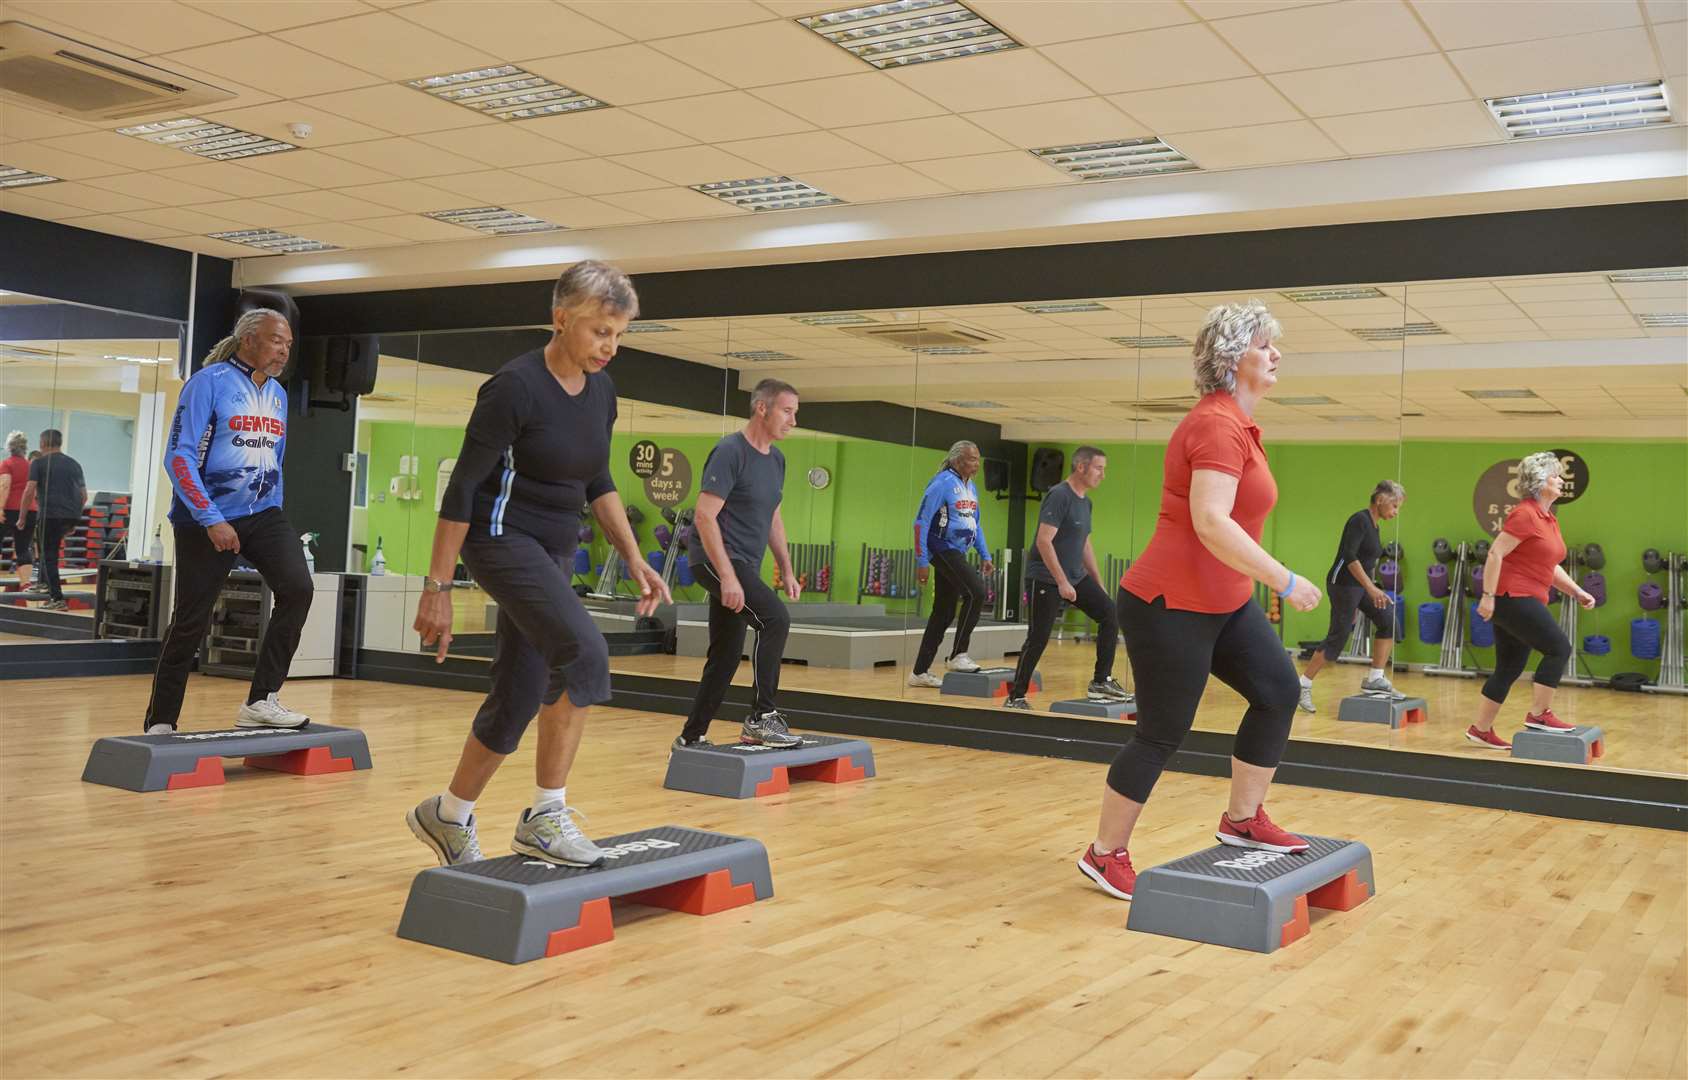 The gym membership will allow access to sports and exercise classes also. Photo: Amit Lennon